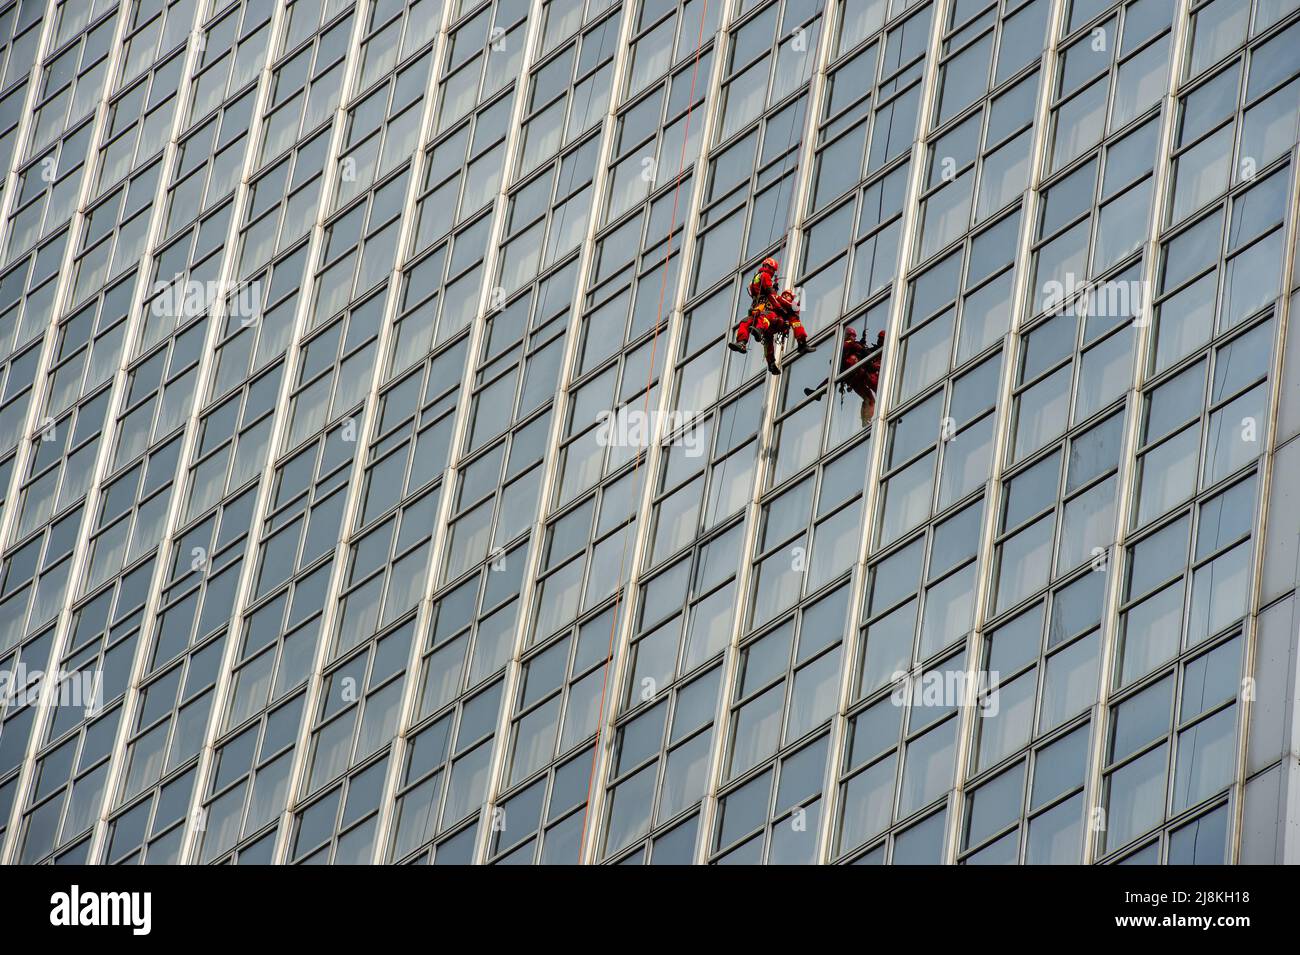 Firefighters scaling the outside of the Park InnHotel in Alexanderplatz, Berlin for the Annual Berlin Firefighter Stair Run Competition. Stock Photo